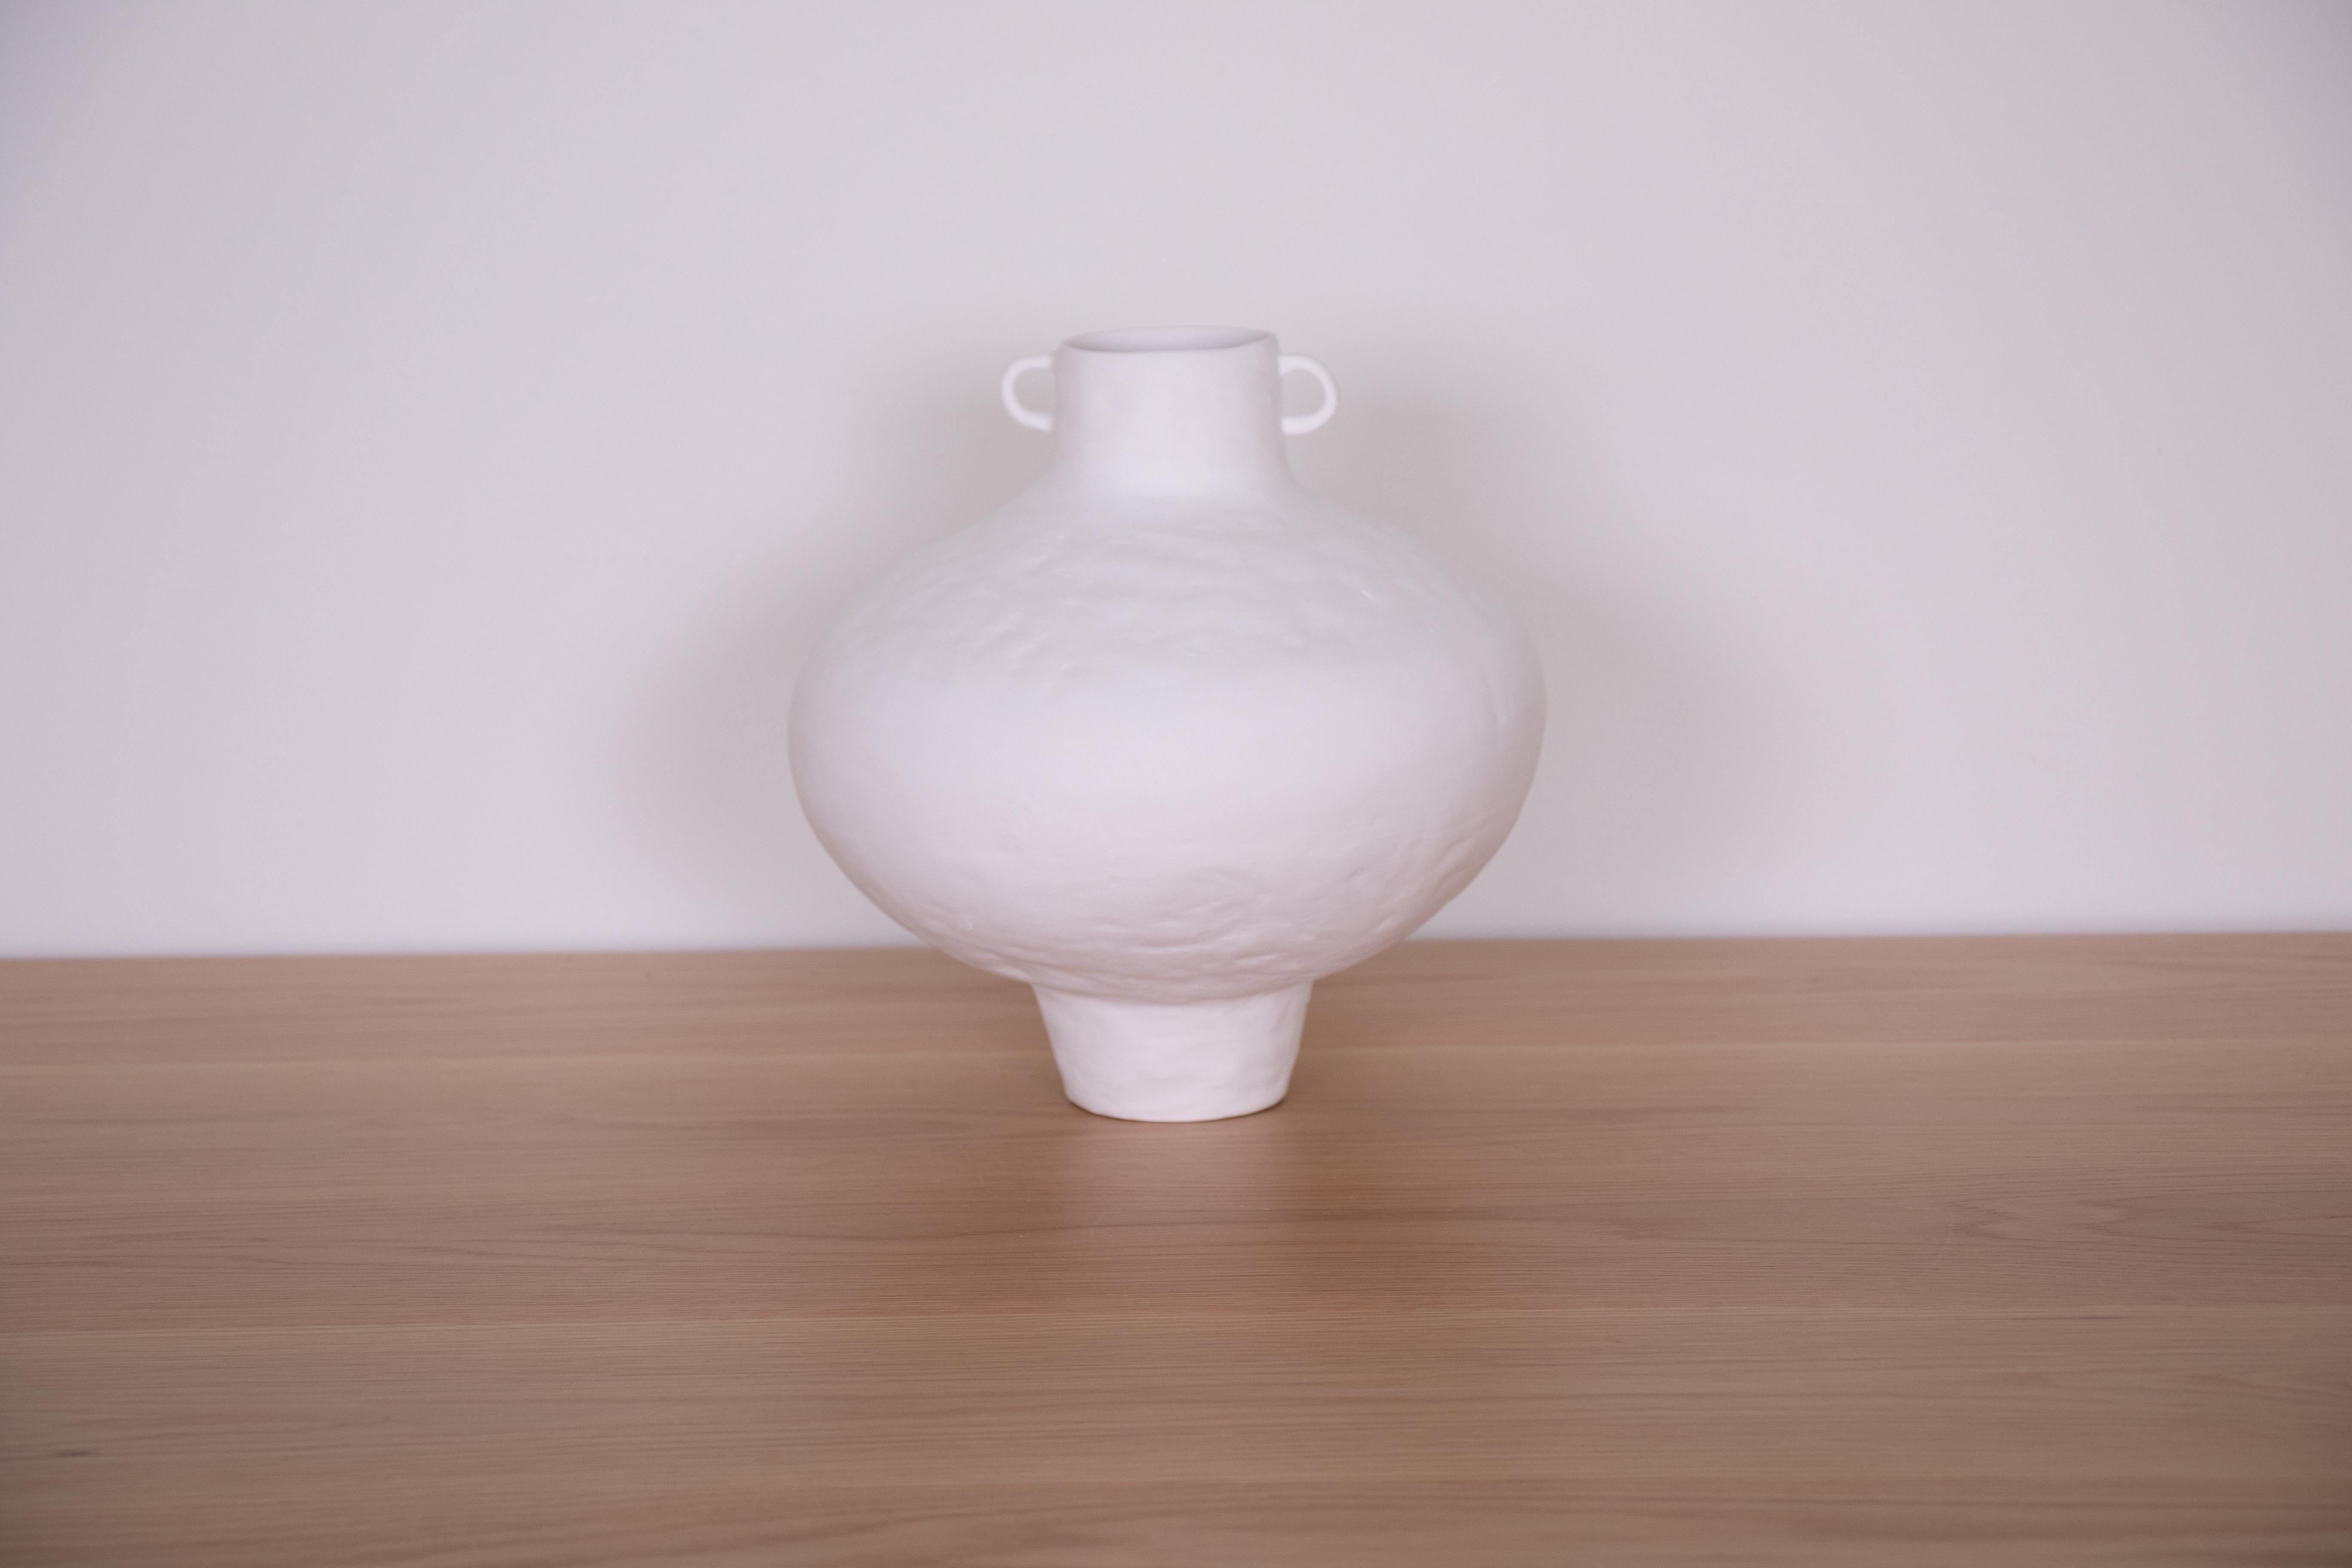 Hand-built terracotta vase in an amphora shape and painted white. Newly made in Spain.